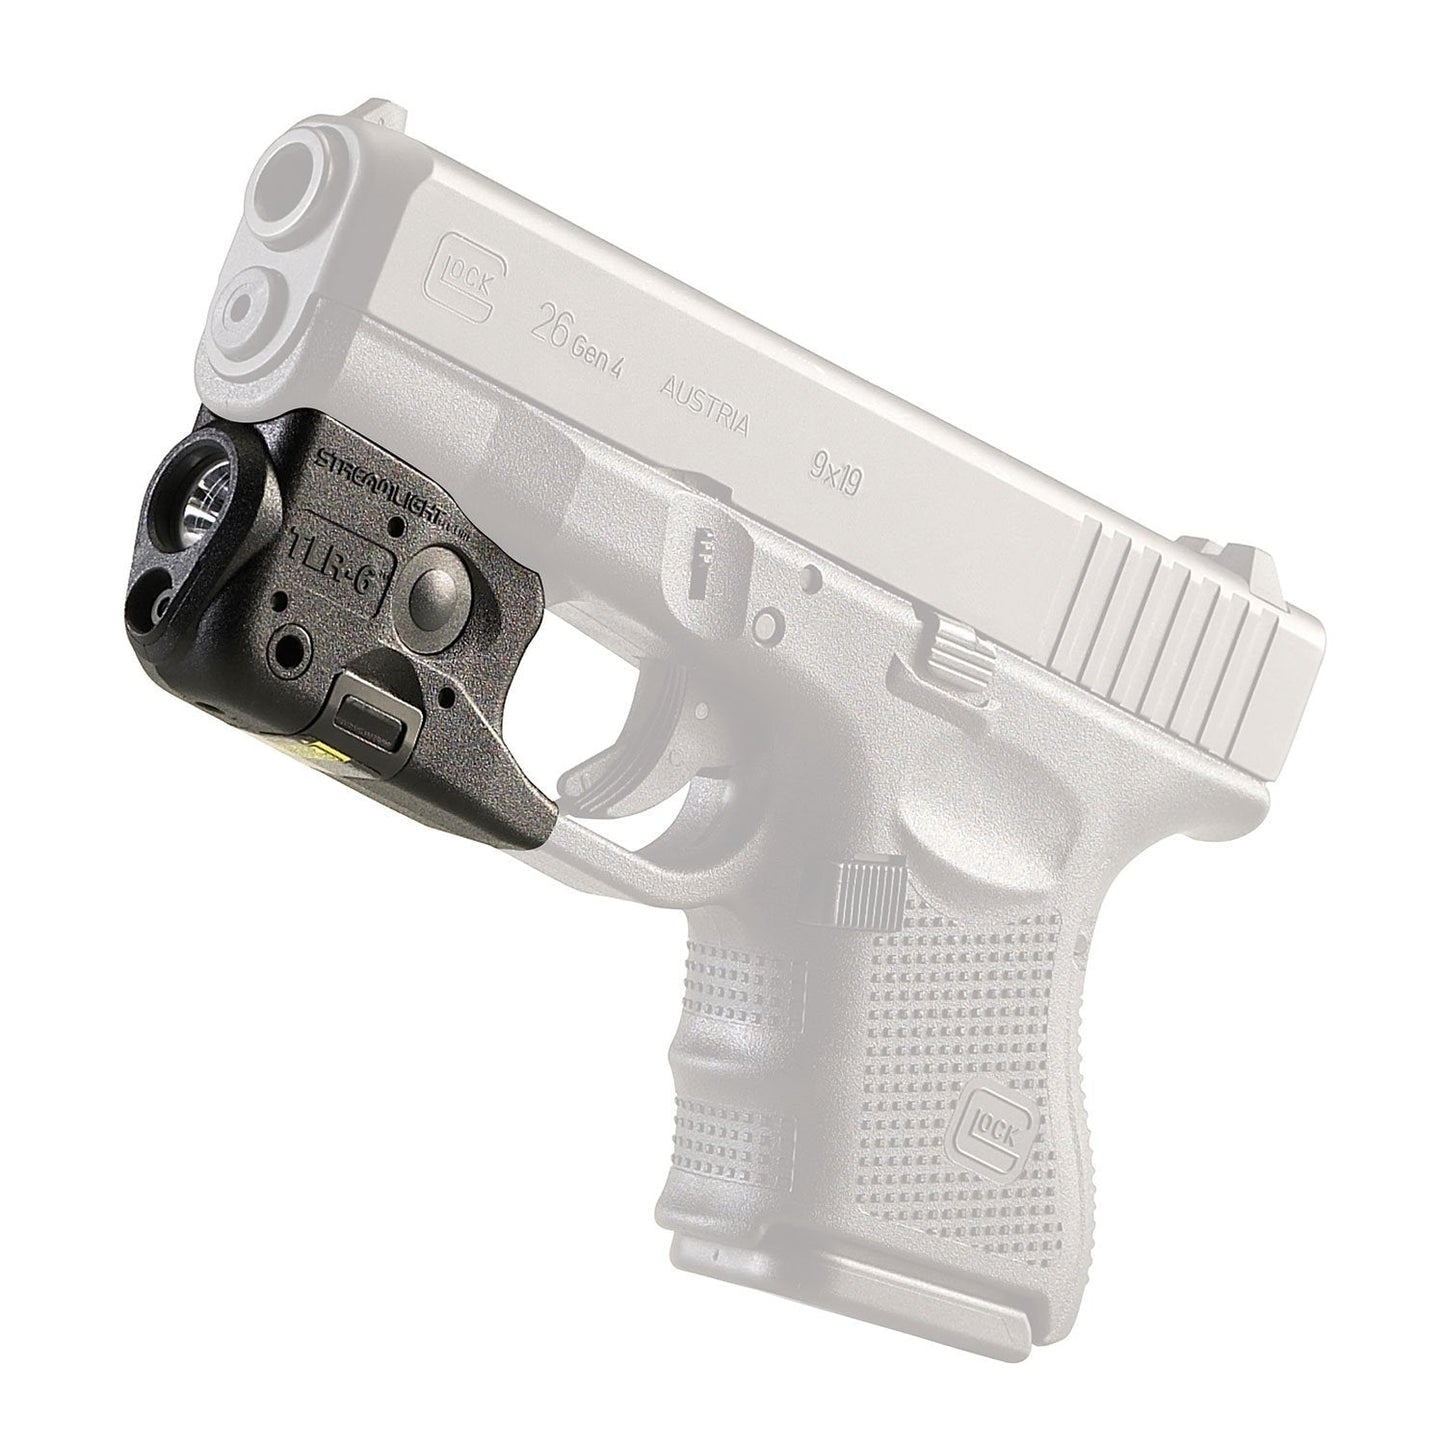 Streamlight TLR-6 for Glock 26/27/33 100-Lumens with Red Laser Tactical Weapon Light Tactical Distributors Ltd New Zealand